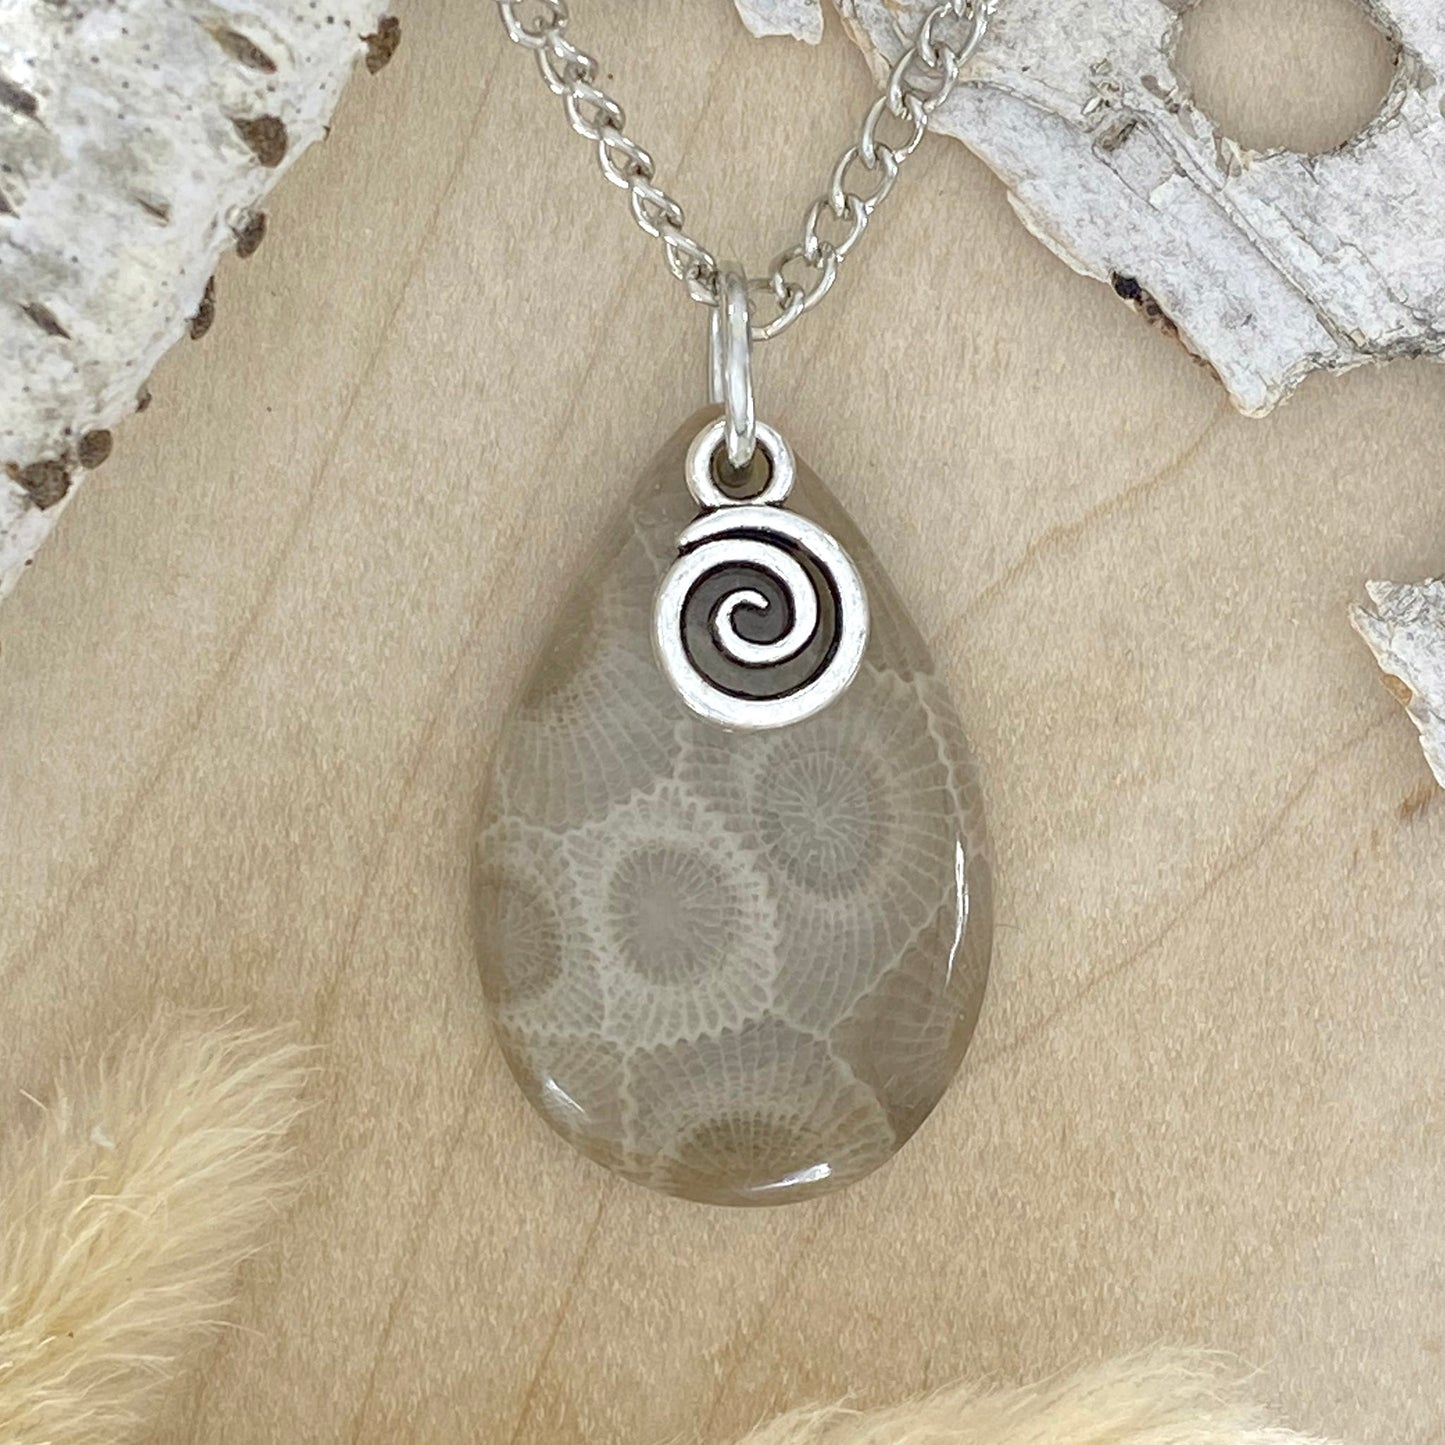 NOTE:  The pendant you receive will be similar to the one pictured.  Since each Petoskey Stone is unique, each pattern will also be unique.  